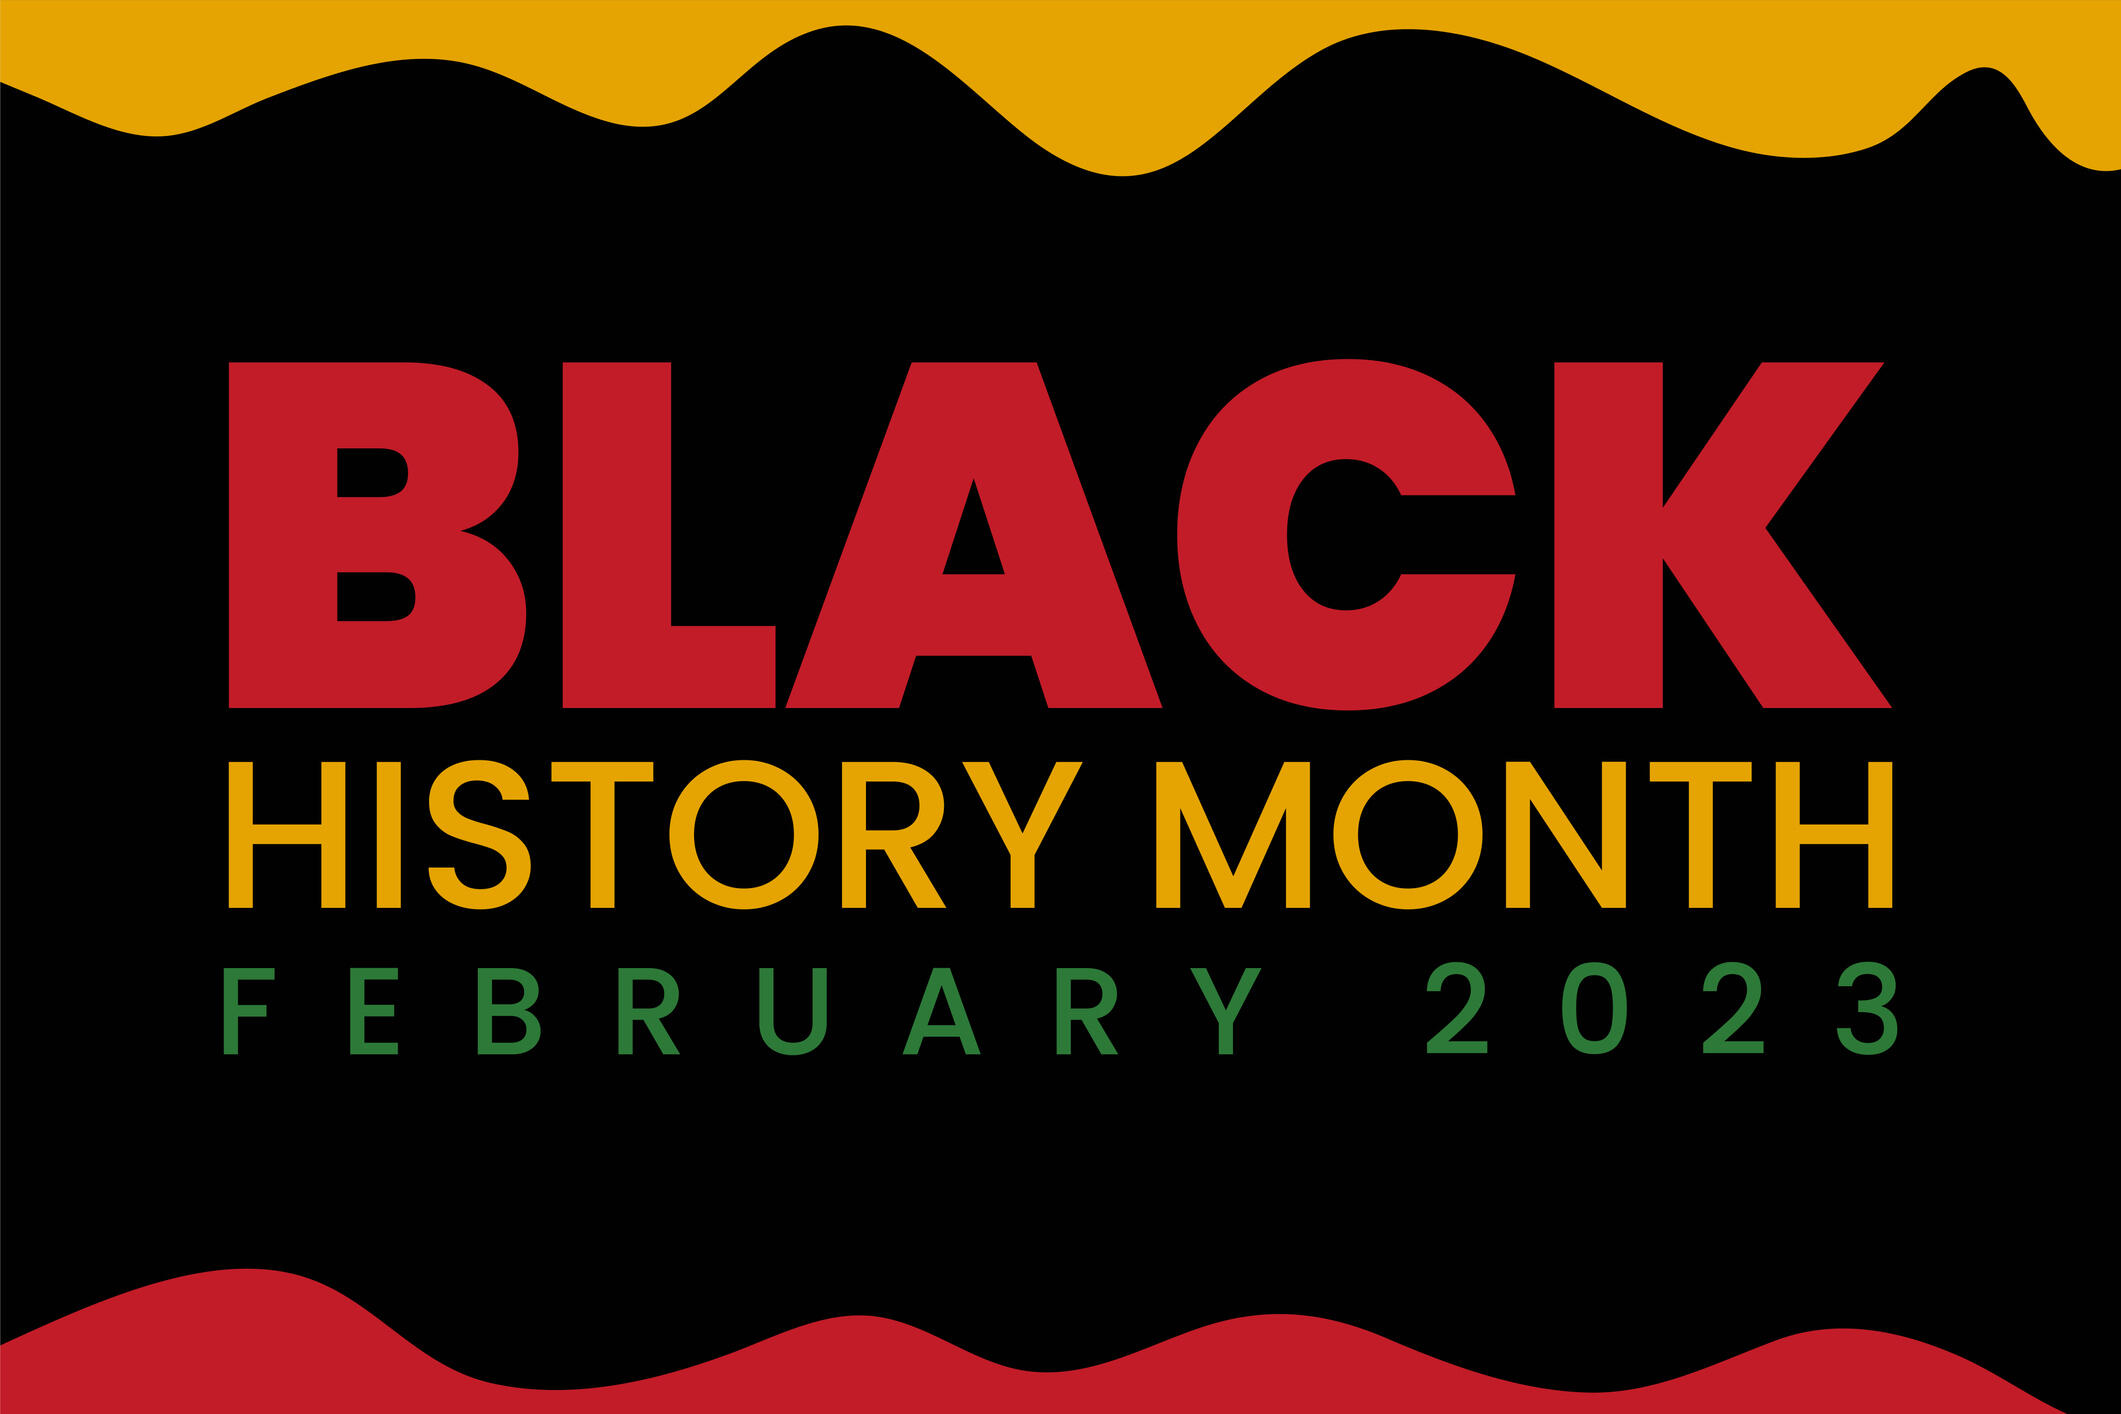 A yellow squiggly shape at the top and a red squiggly shape at the bottom. In the middle text reads \"BLACK HISTORY MONTH FEBRUARY 2023\"